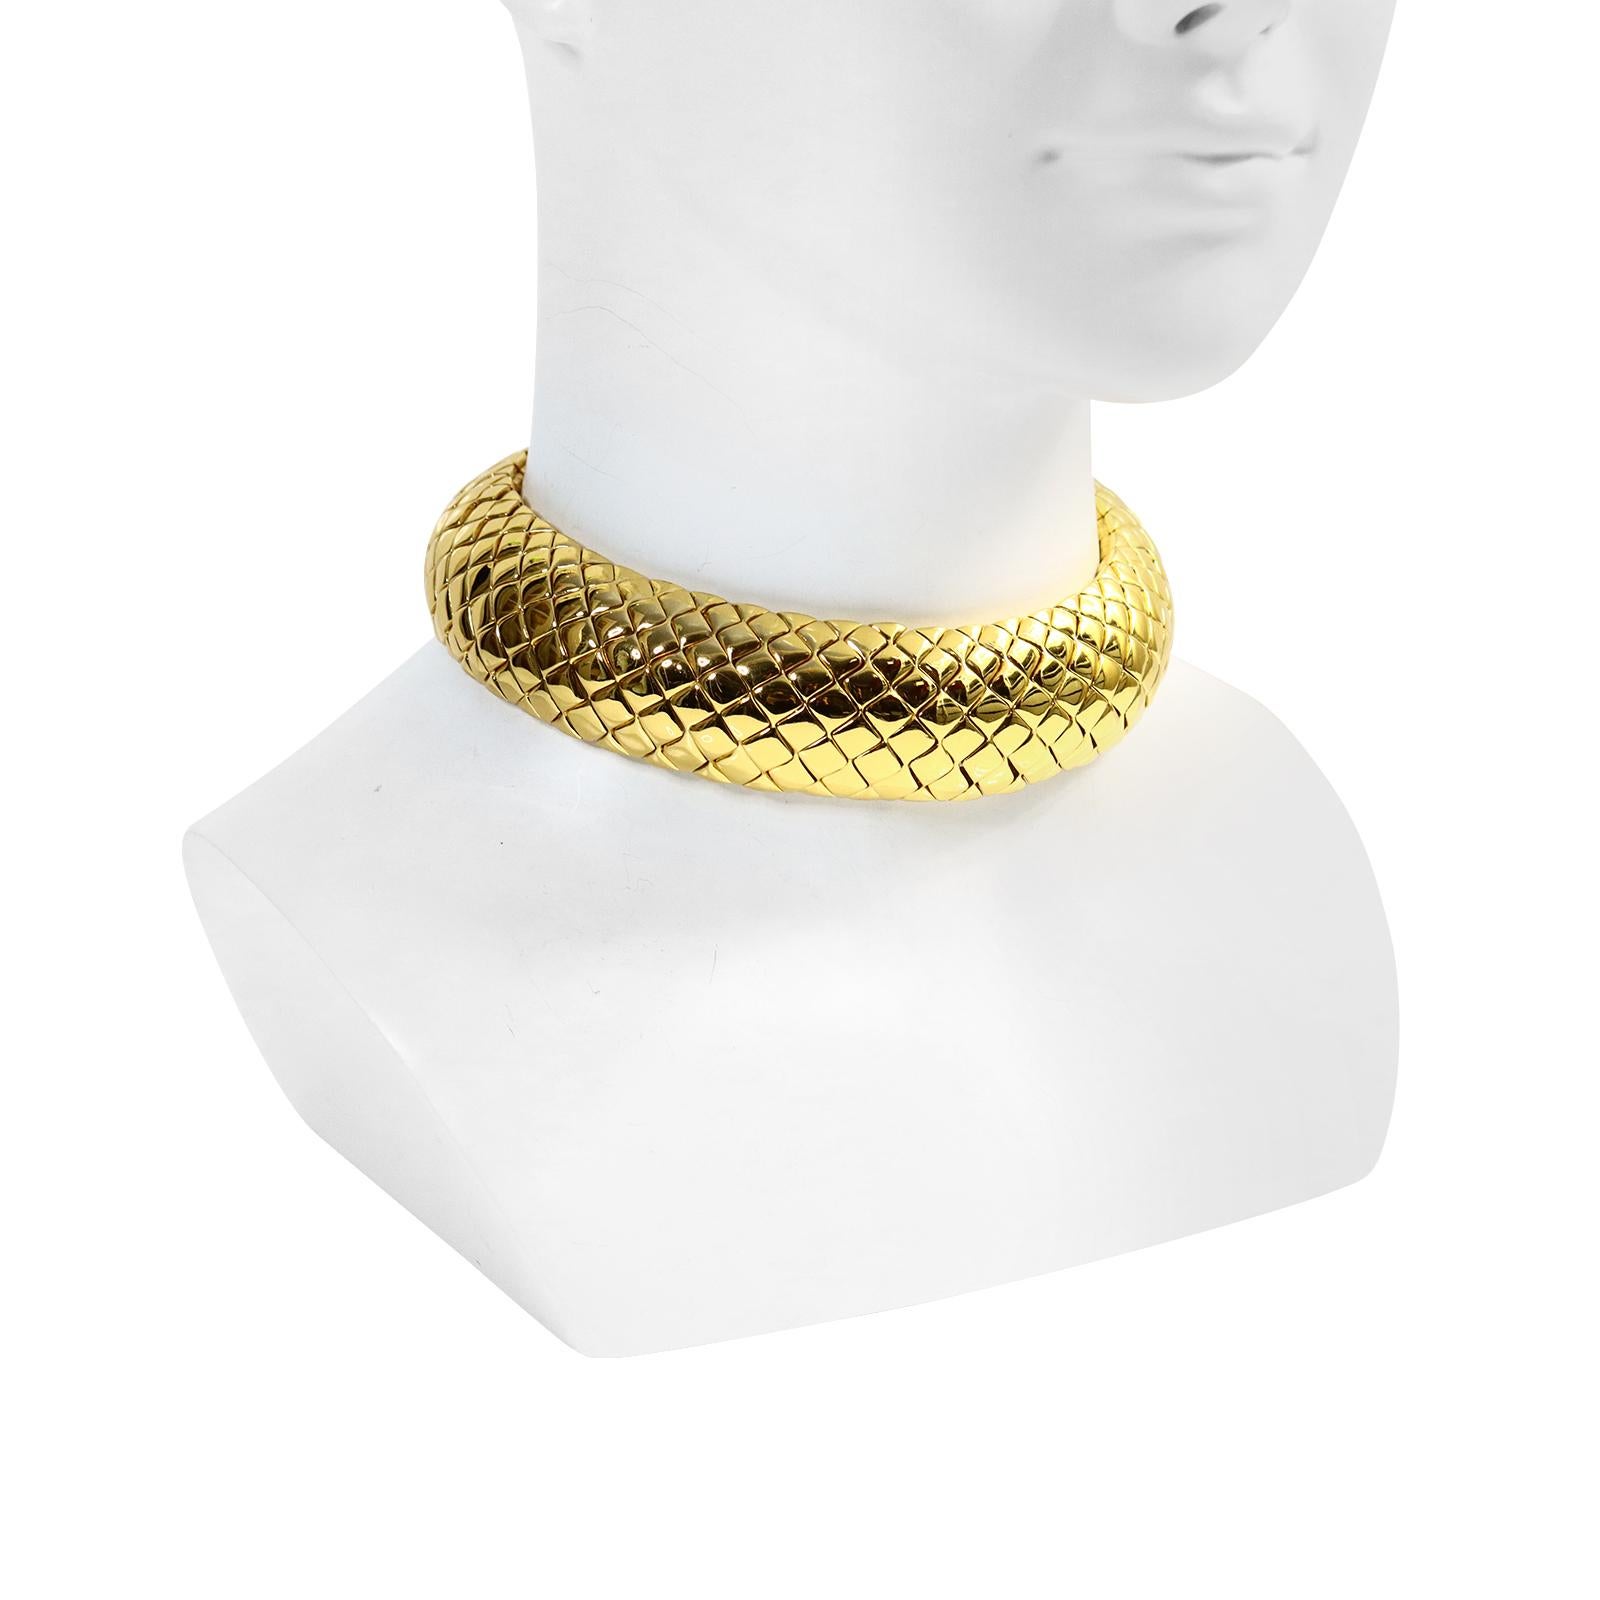 Vintage Yves Saint Laurent YSL Heavy Gold Quilted Choker Necklace. Quilting make up this Rounded Choker Necklace. This is a classic piece that will always be in style.  The quilting was used by Chanel and by YSL. You will always look elevated and